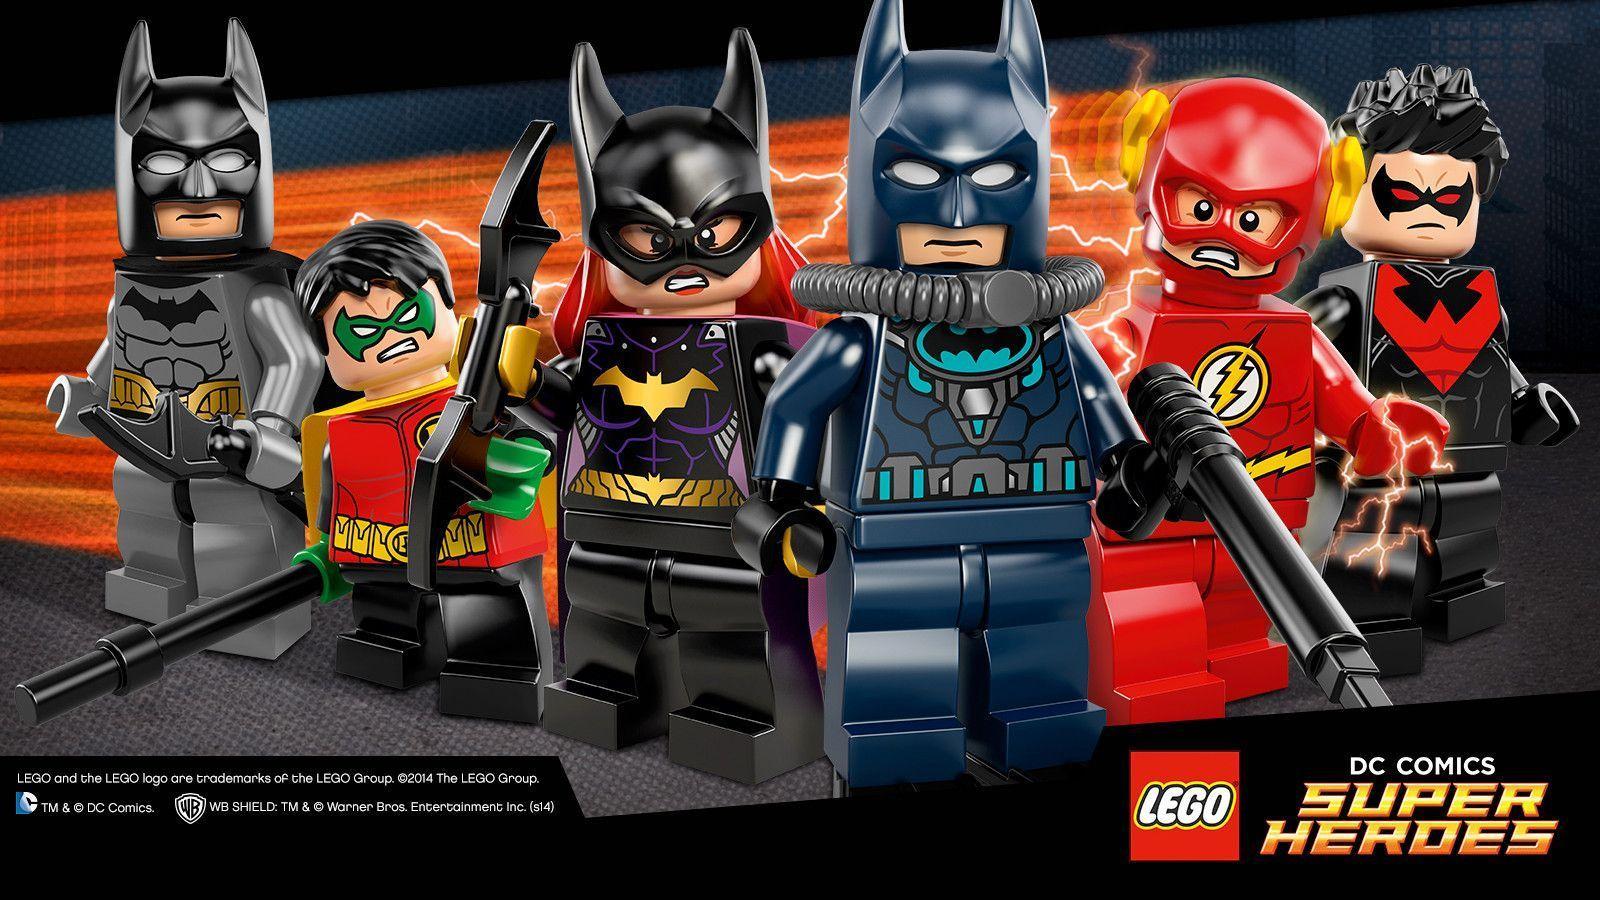 Super Heroes, The official home of the LEGO® SuperHeroes